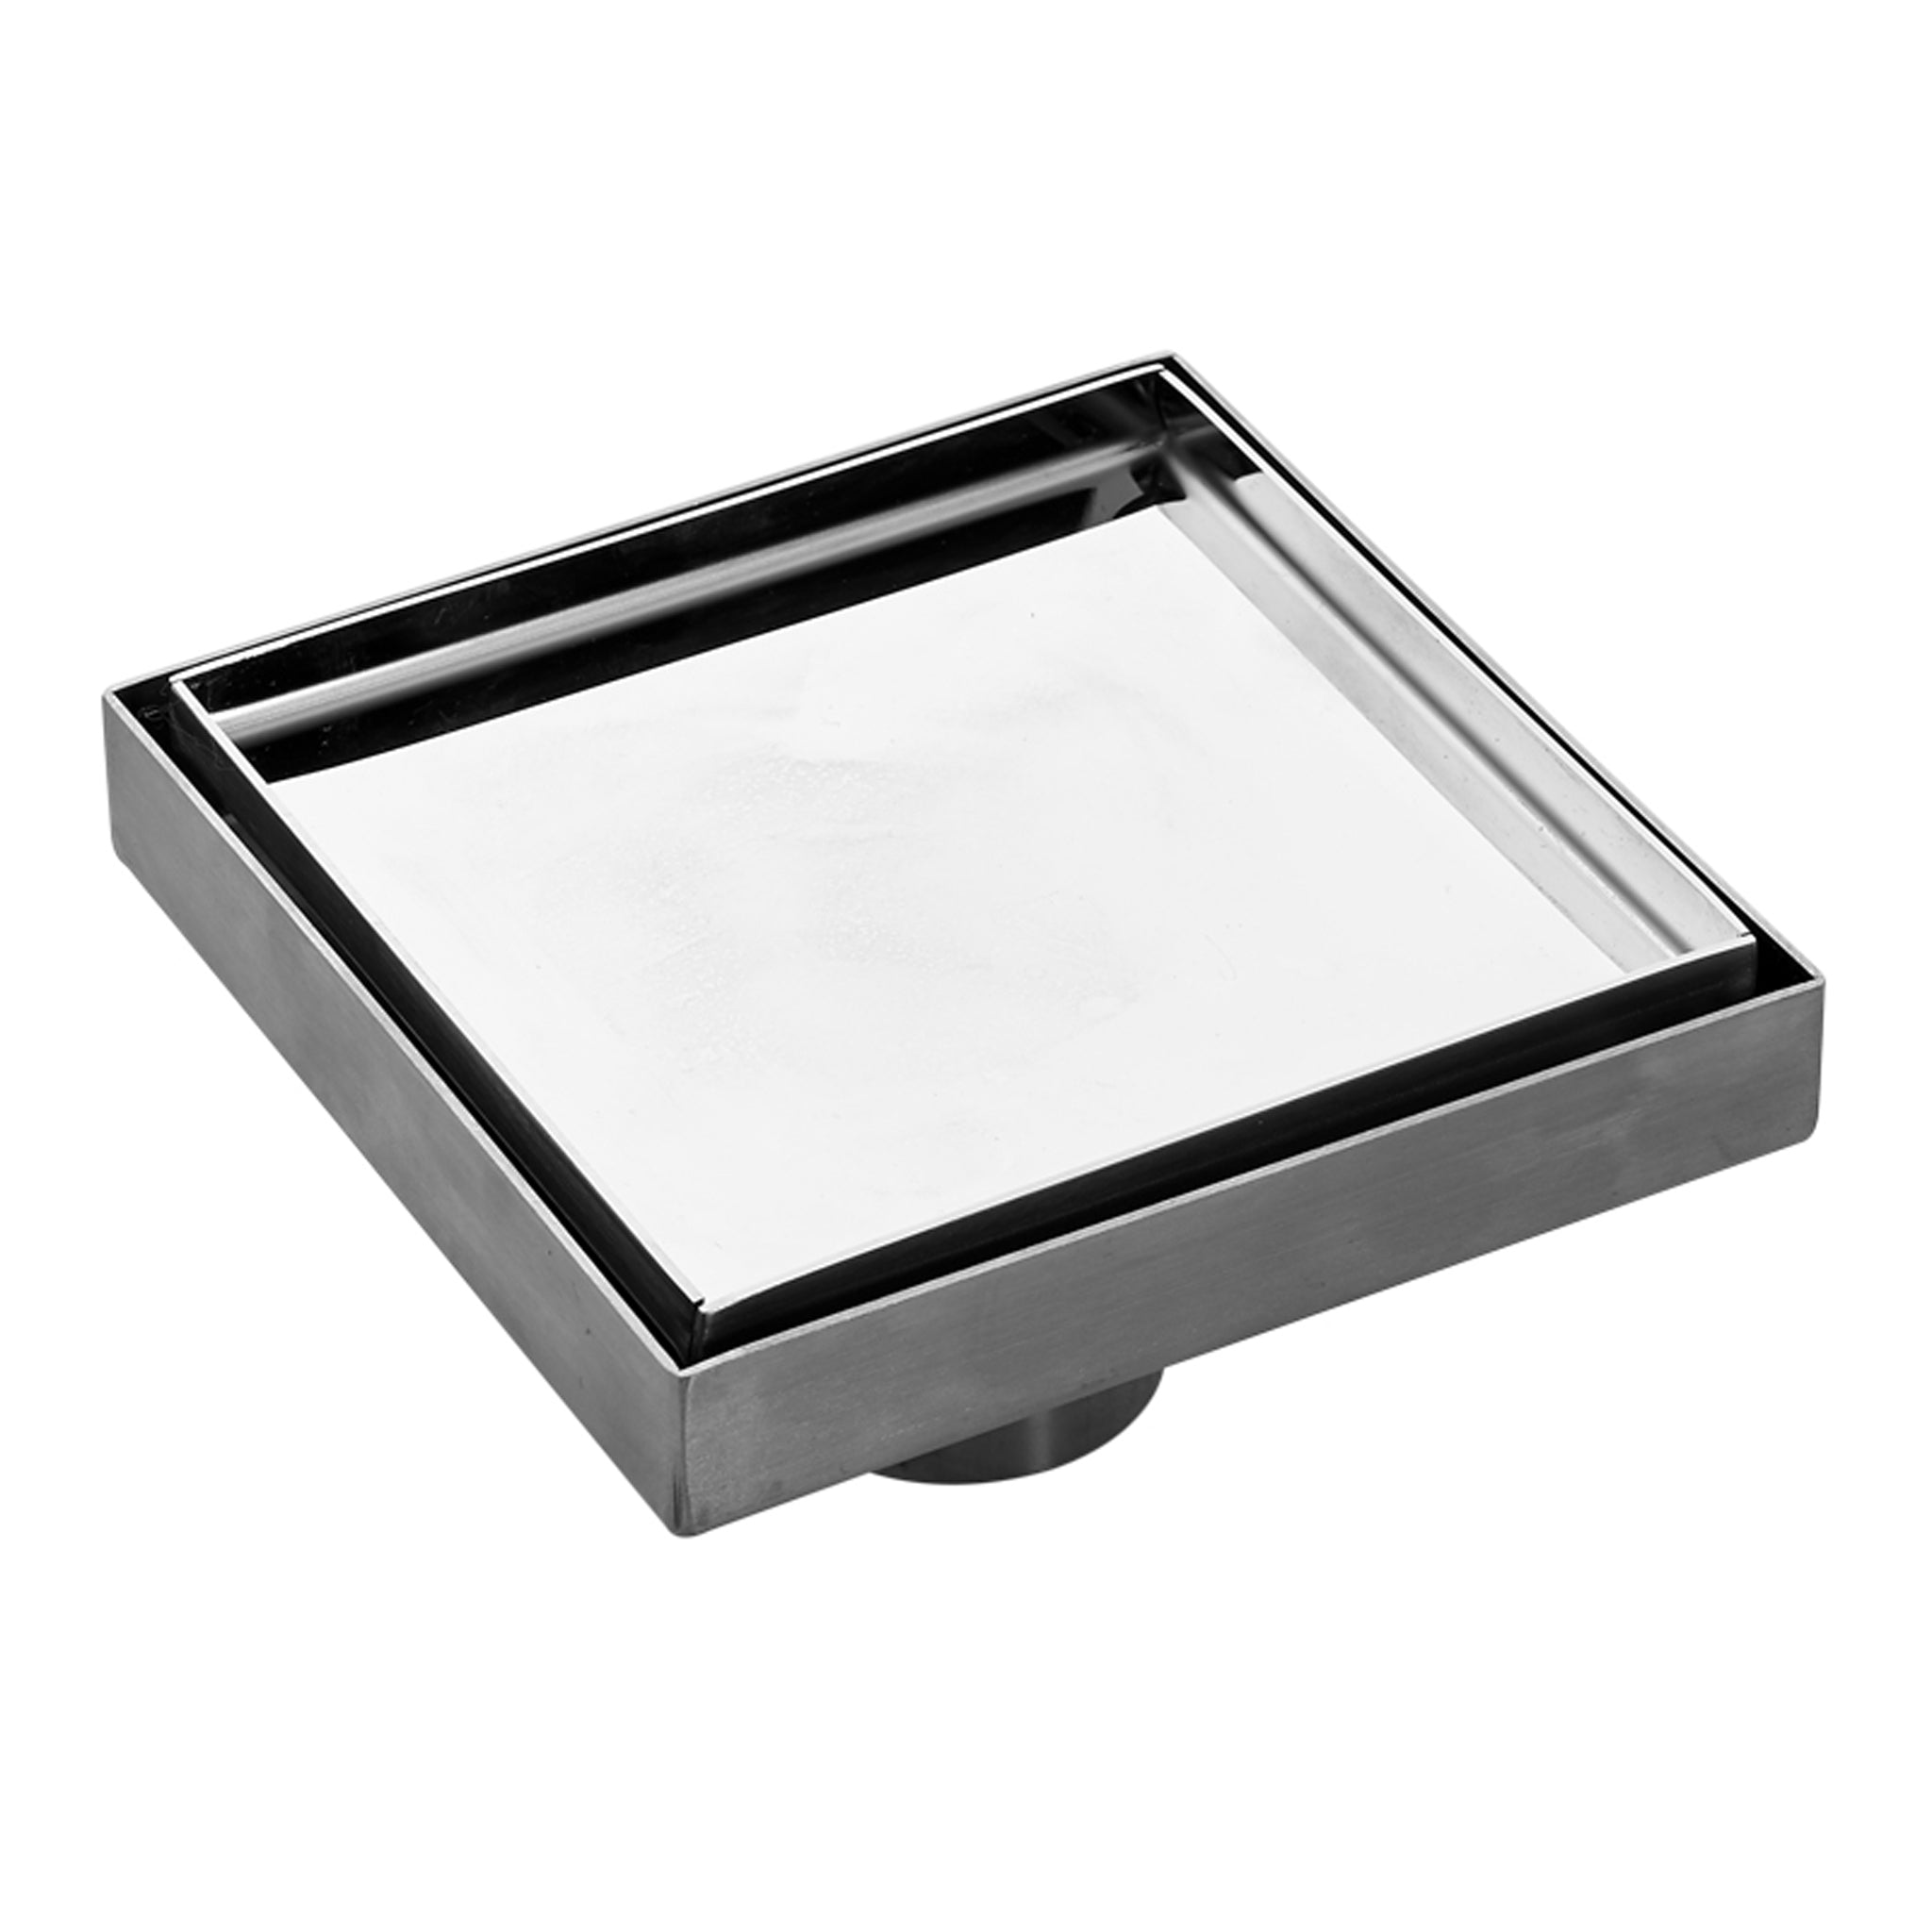 Aquamoon  Tile Insert 6 x 6  Linear Shower Drain, 316 Chrome Stainless Steel Square with Hair Strainer and Fittings